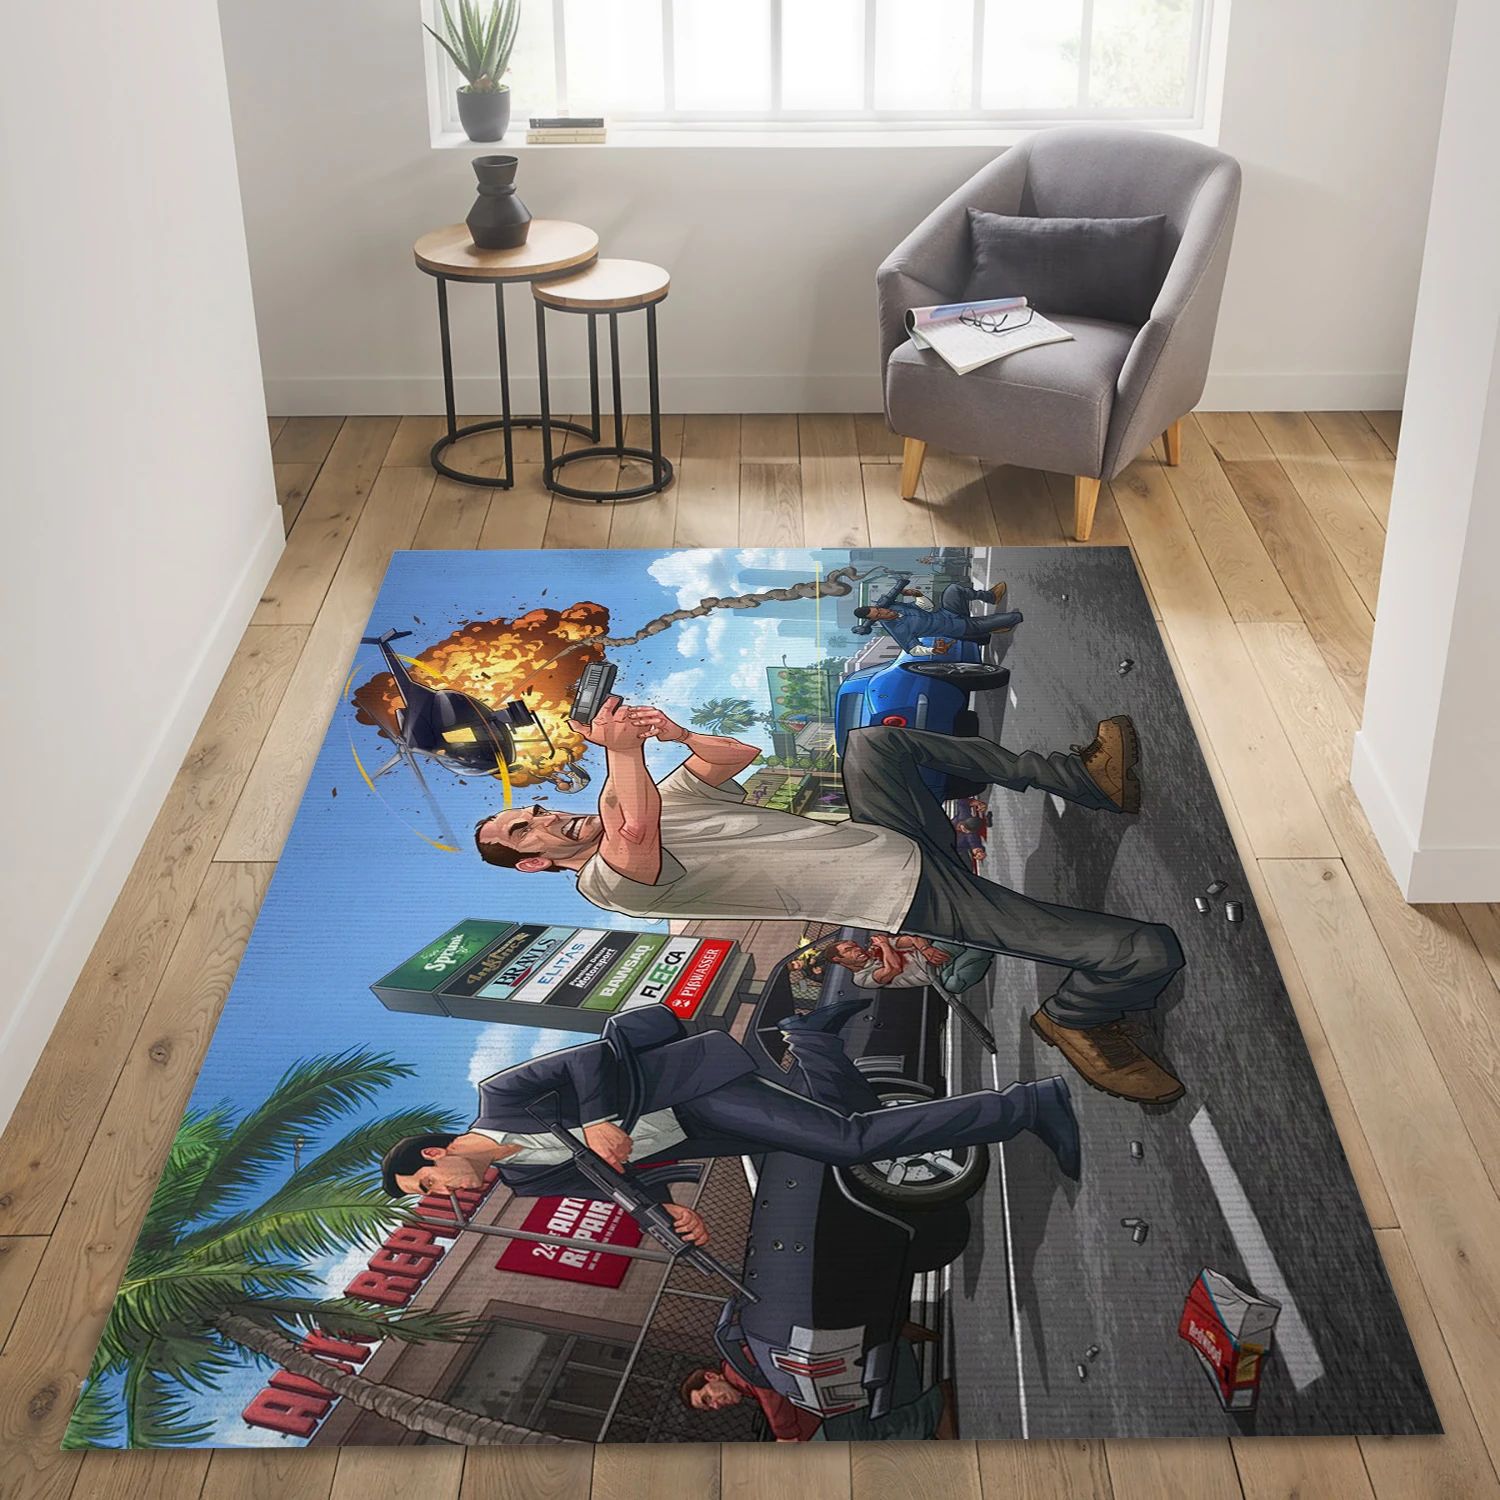 Grand Theft Auto V Video Game Area Rug For Christmas, Area Rug - Home Decor Floor Decor - Indoor Outdoor Rugs